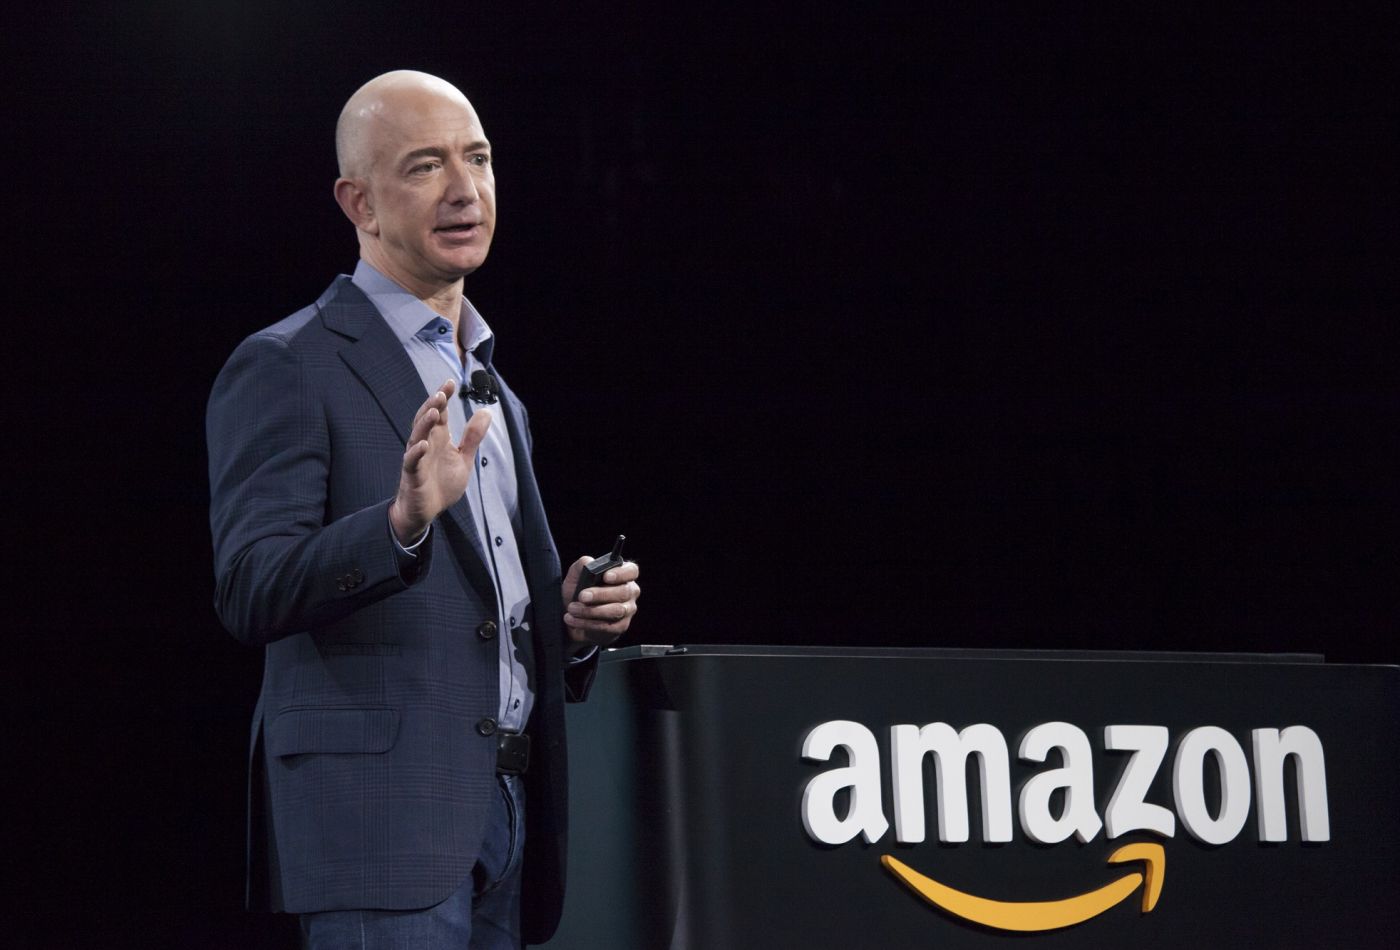 Meet The Men Who Support Ceos Of Amazon And Whole Foods